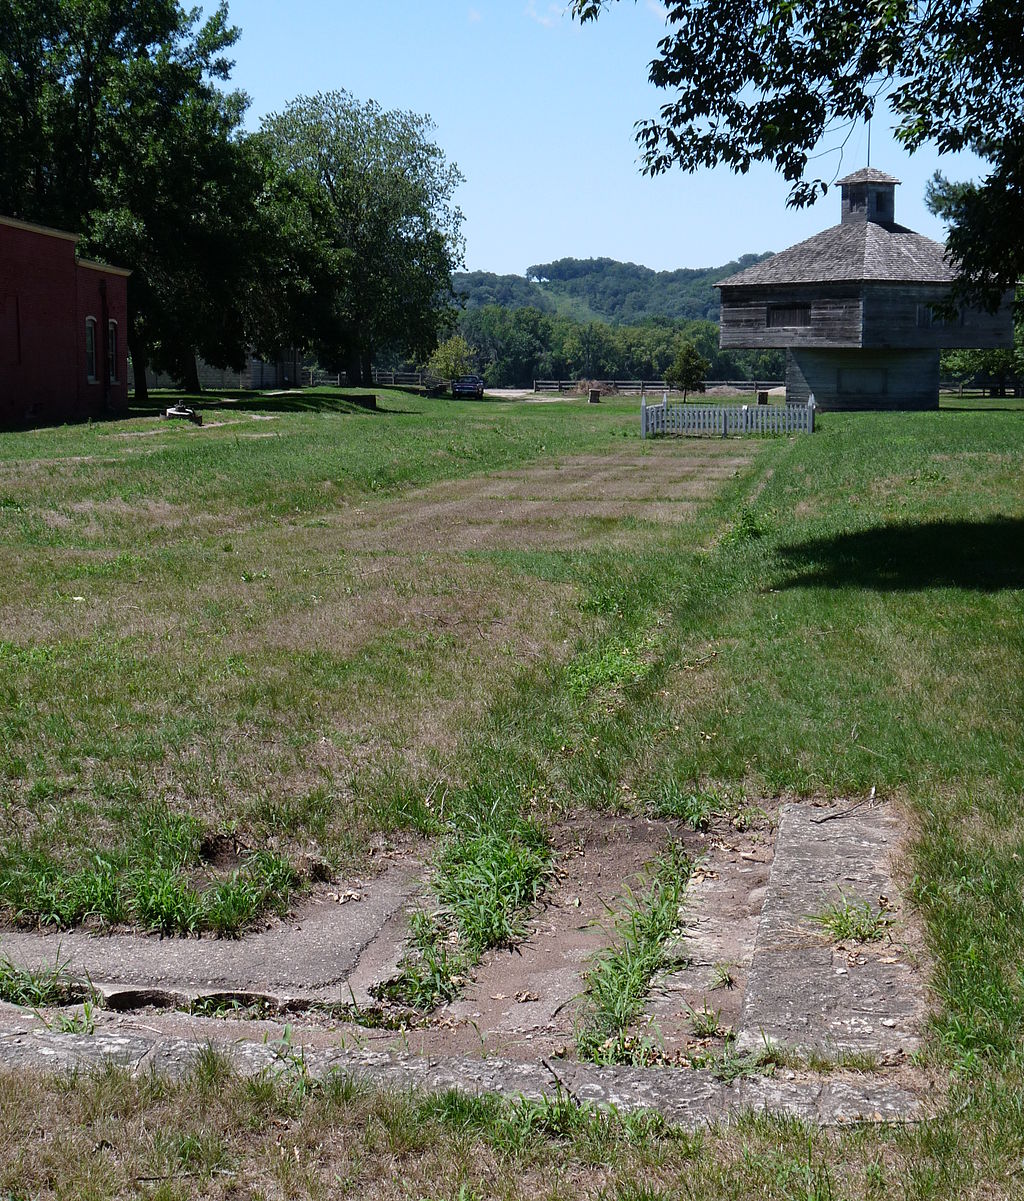 The foundations of the first fort with a reconstructed blockhouse in the background. The foundations are located just north of the Villa Louis house.